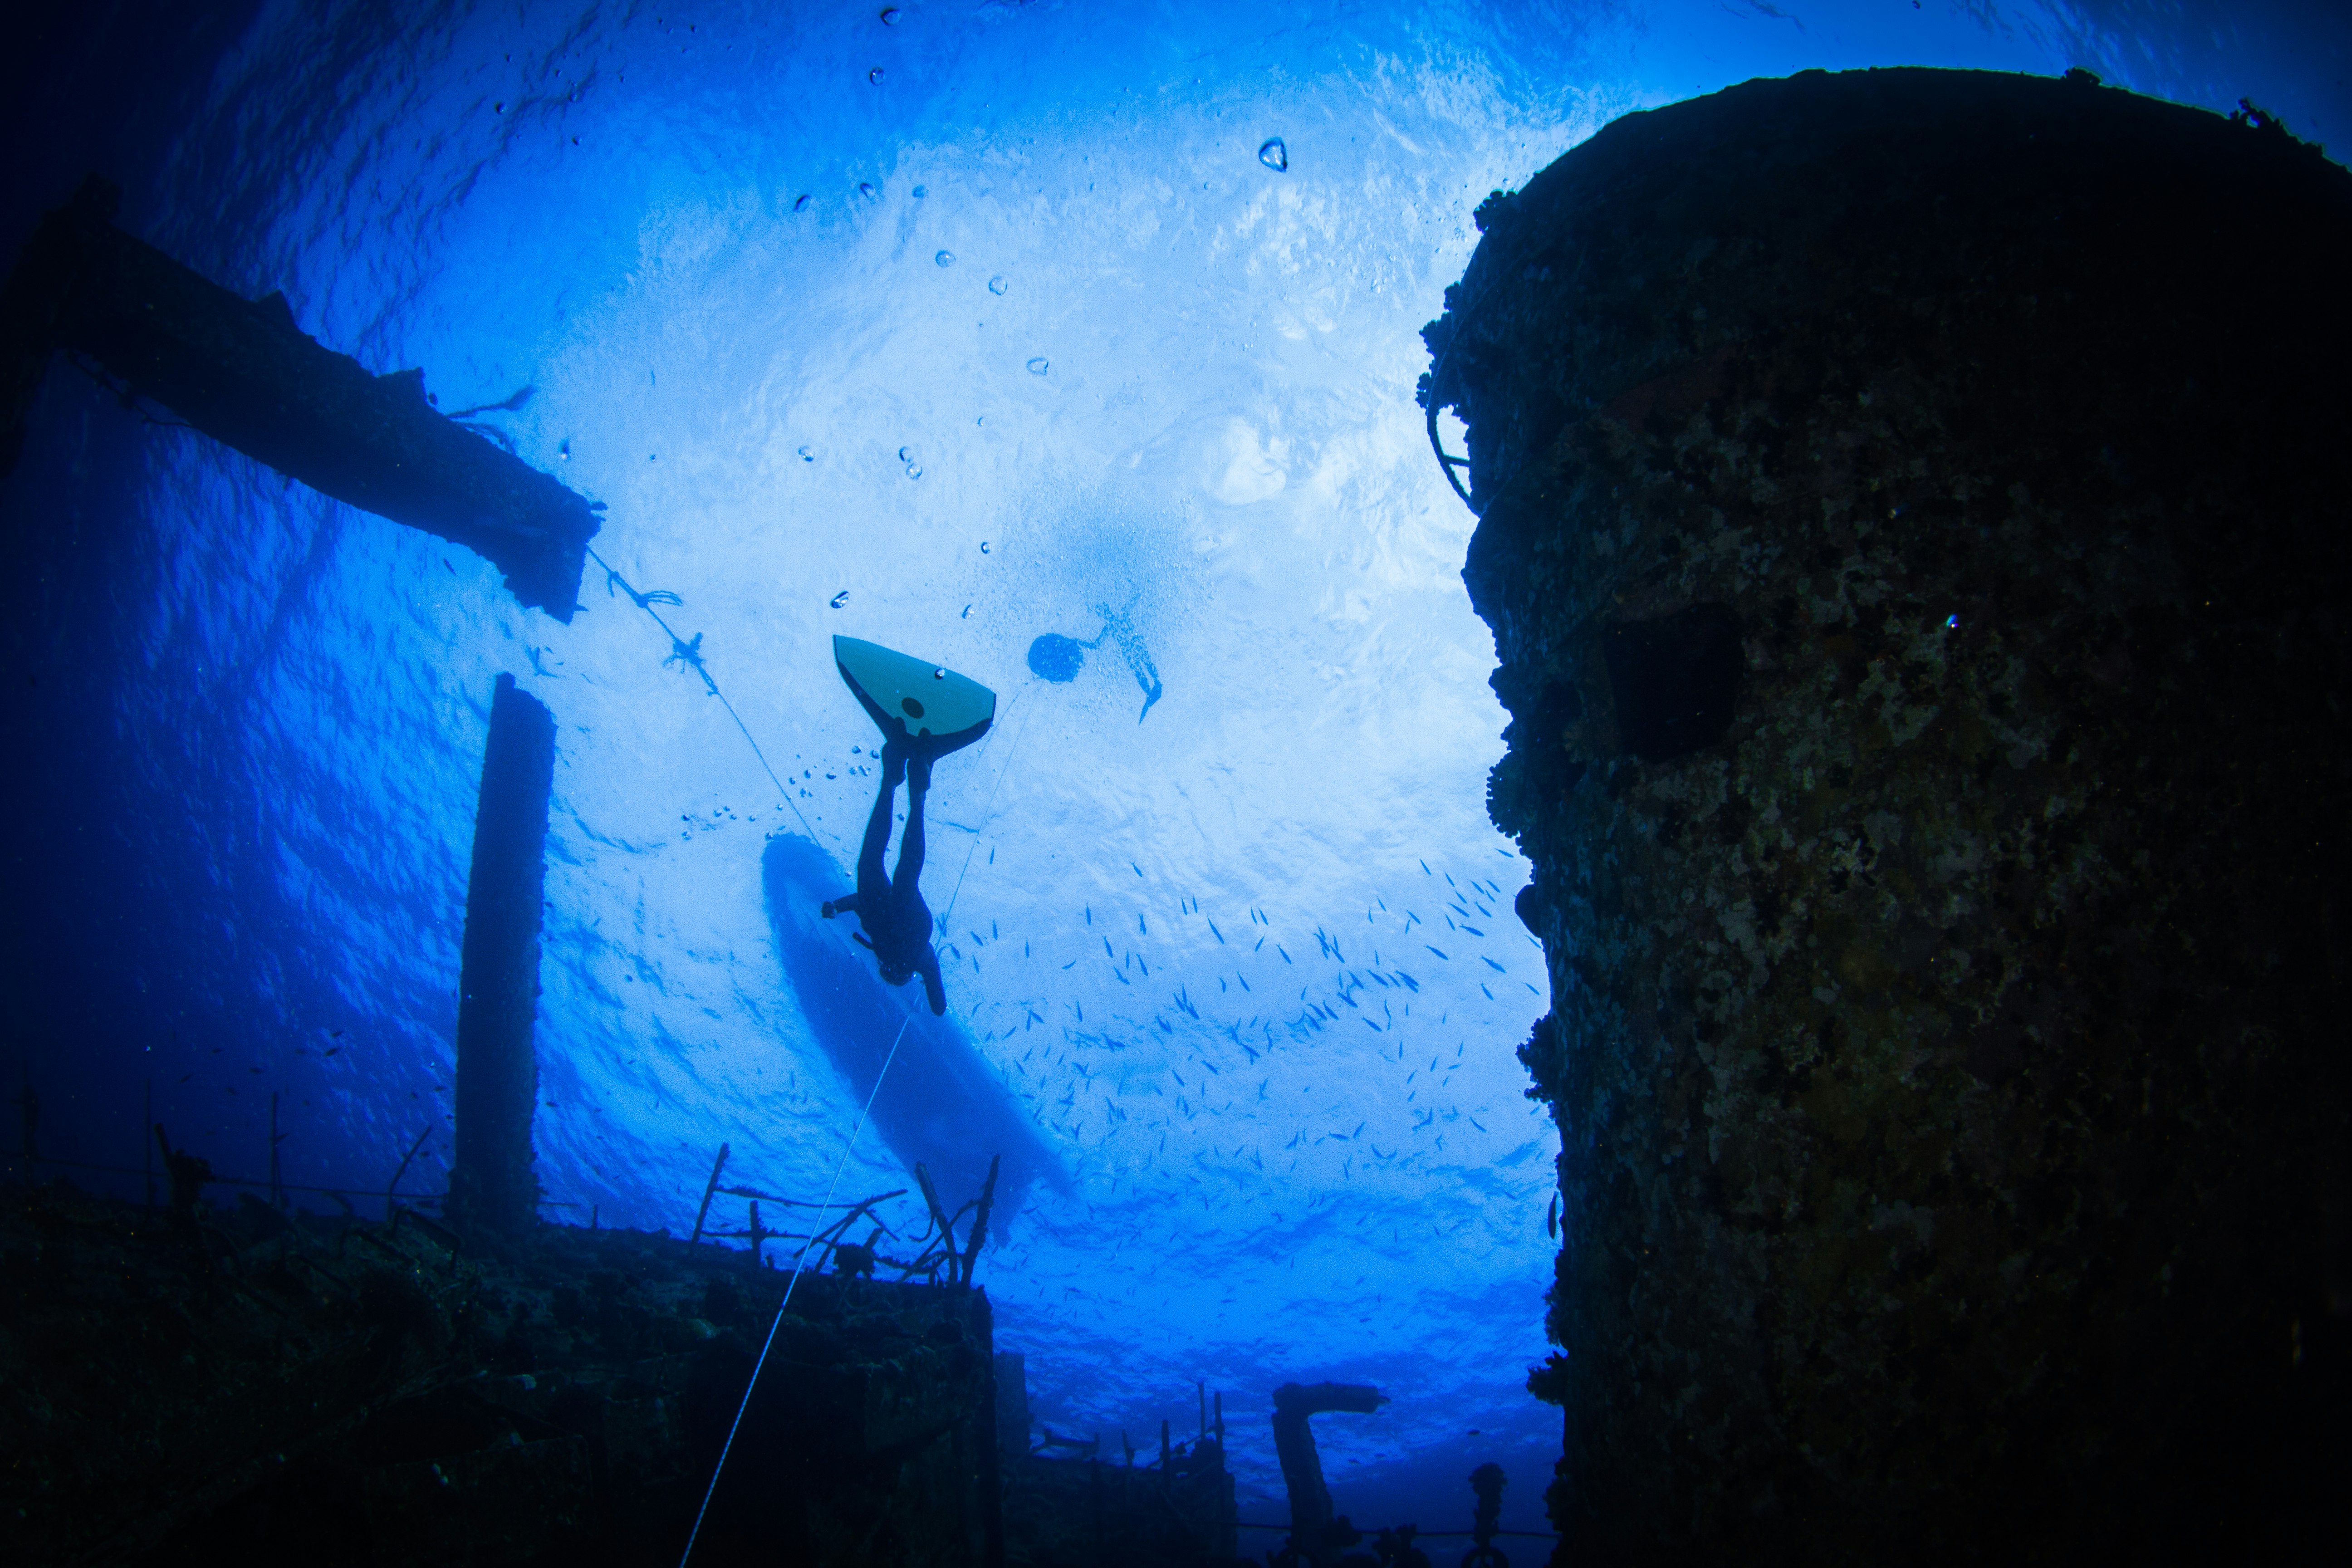 At some wrecks it pays to be an experienced freediver.